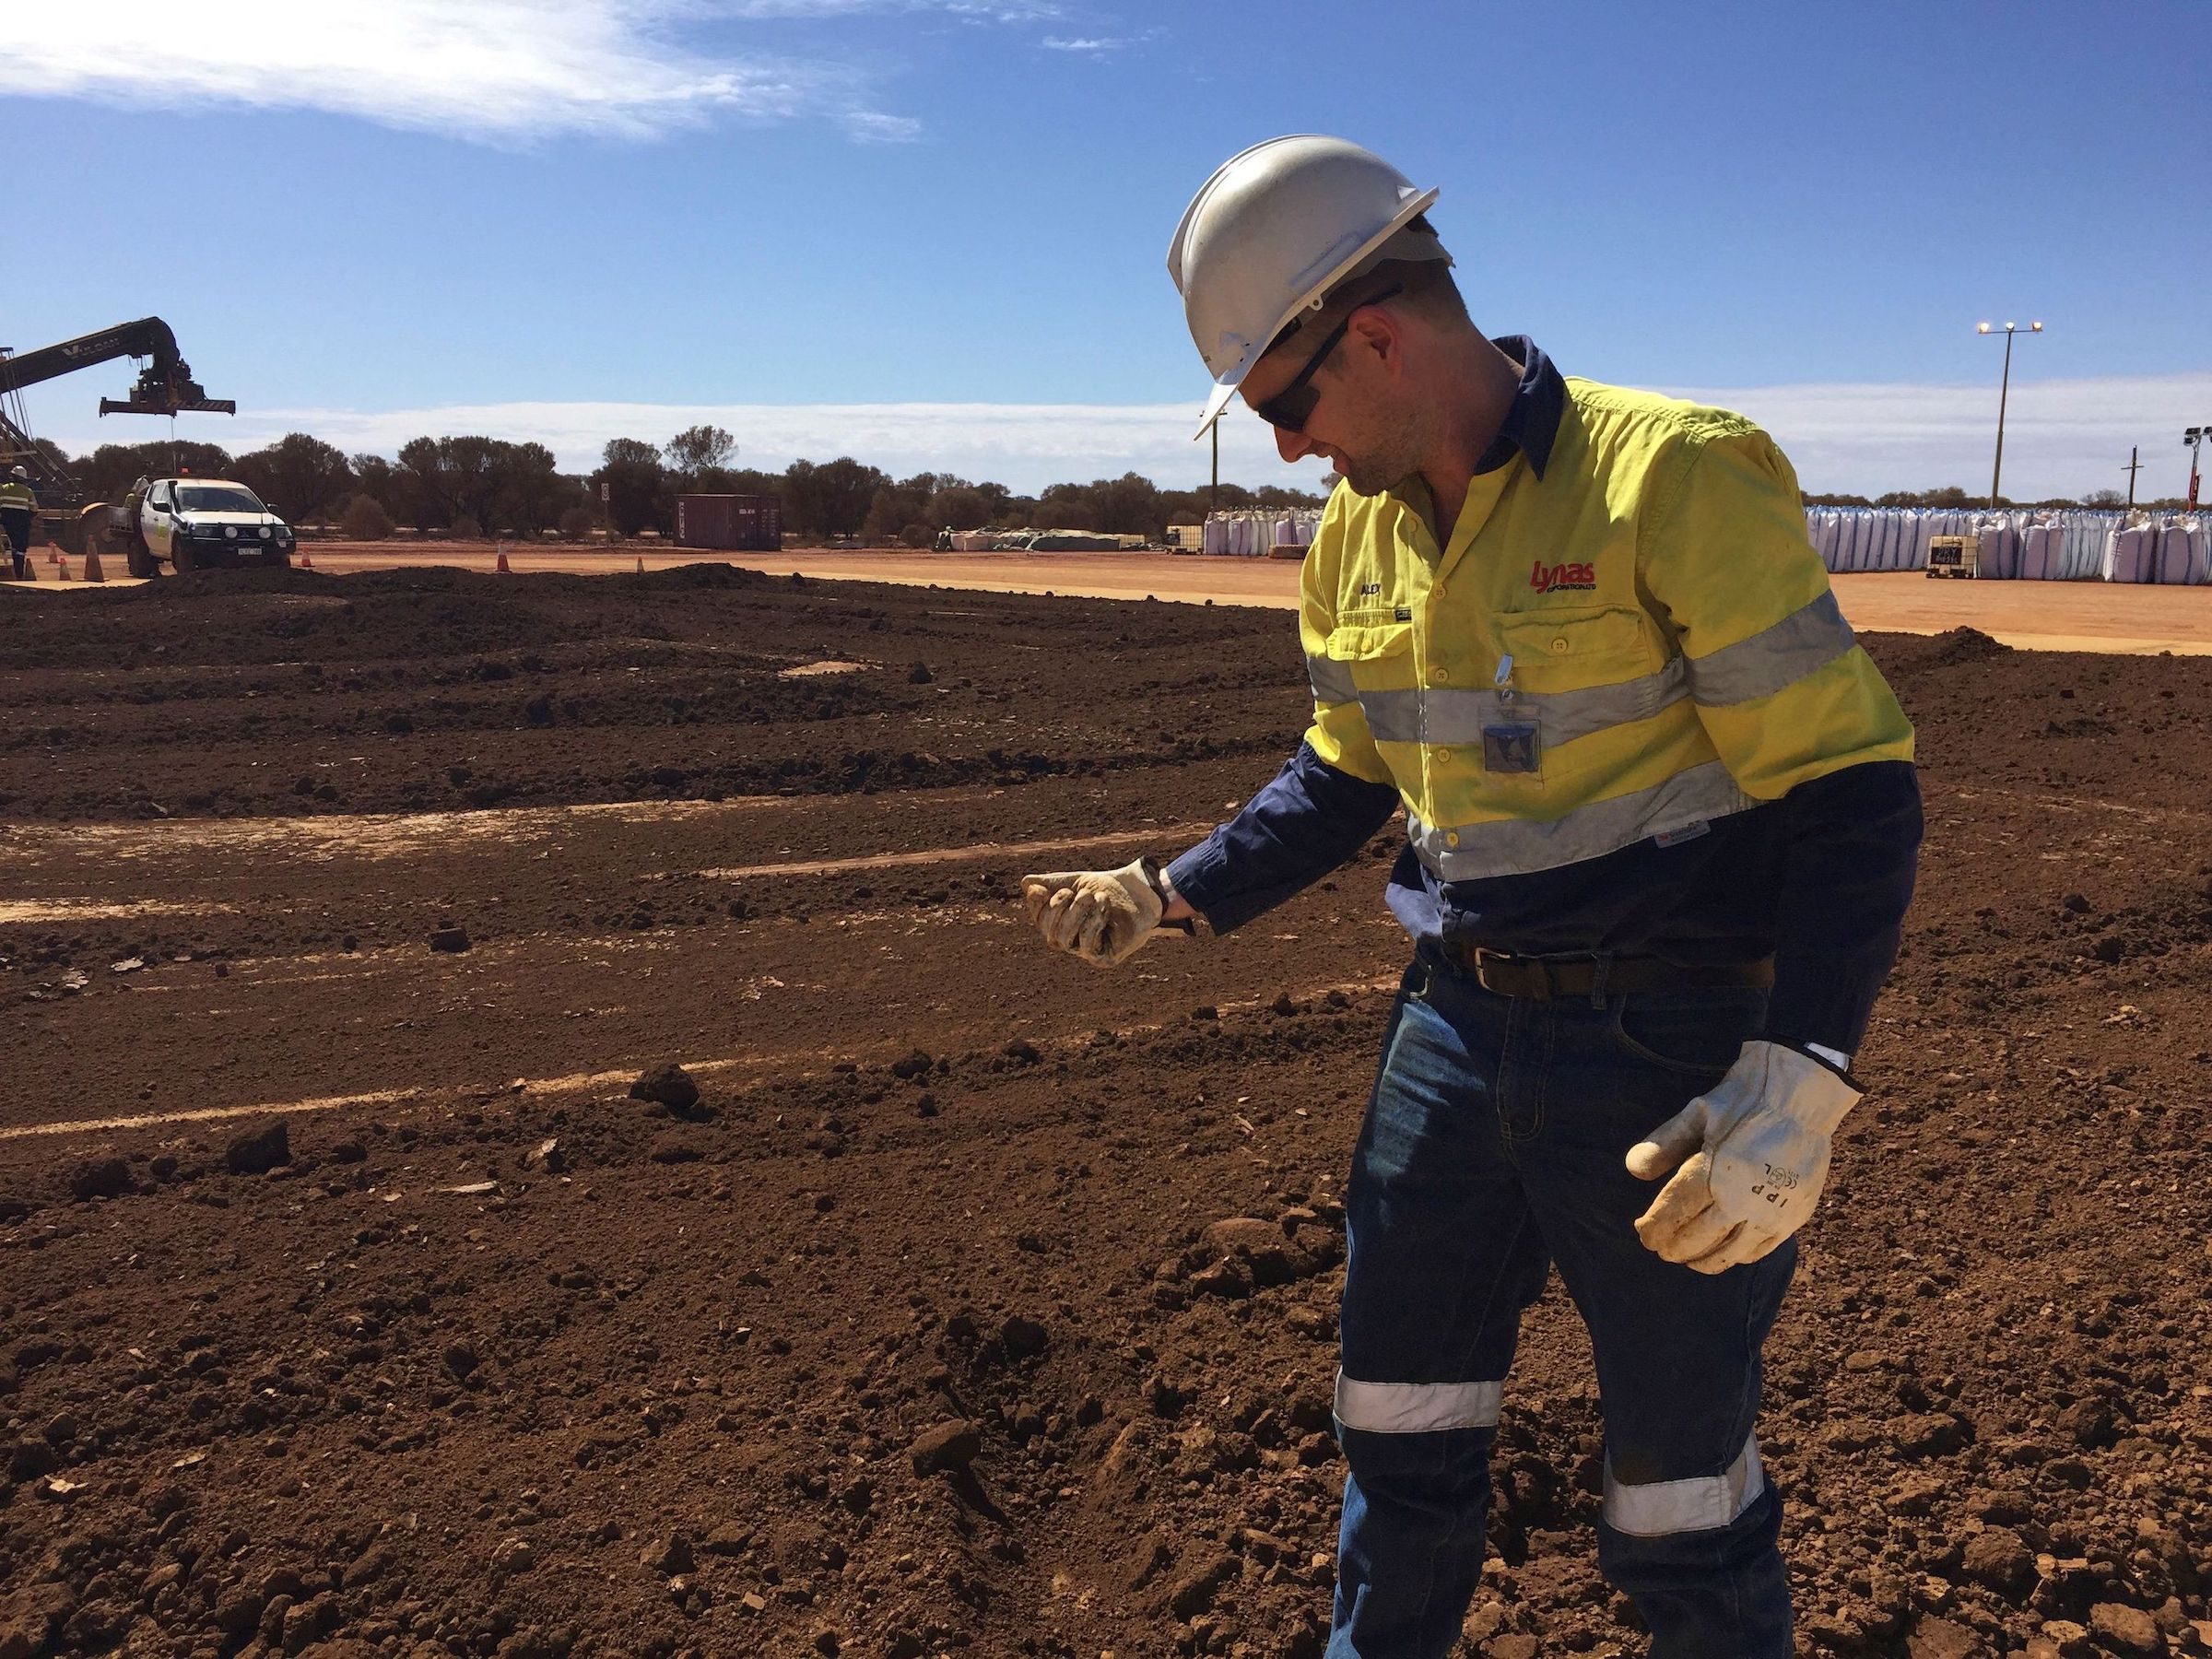 Australia unveils $360 million in critical minerals funding to offset China dominance